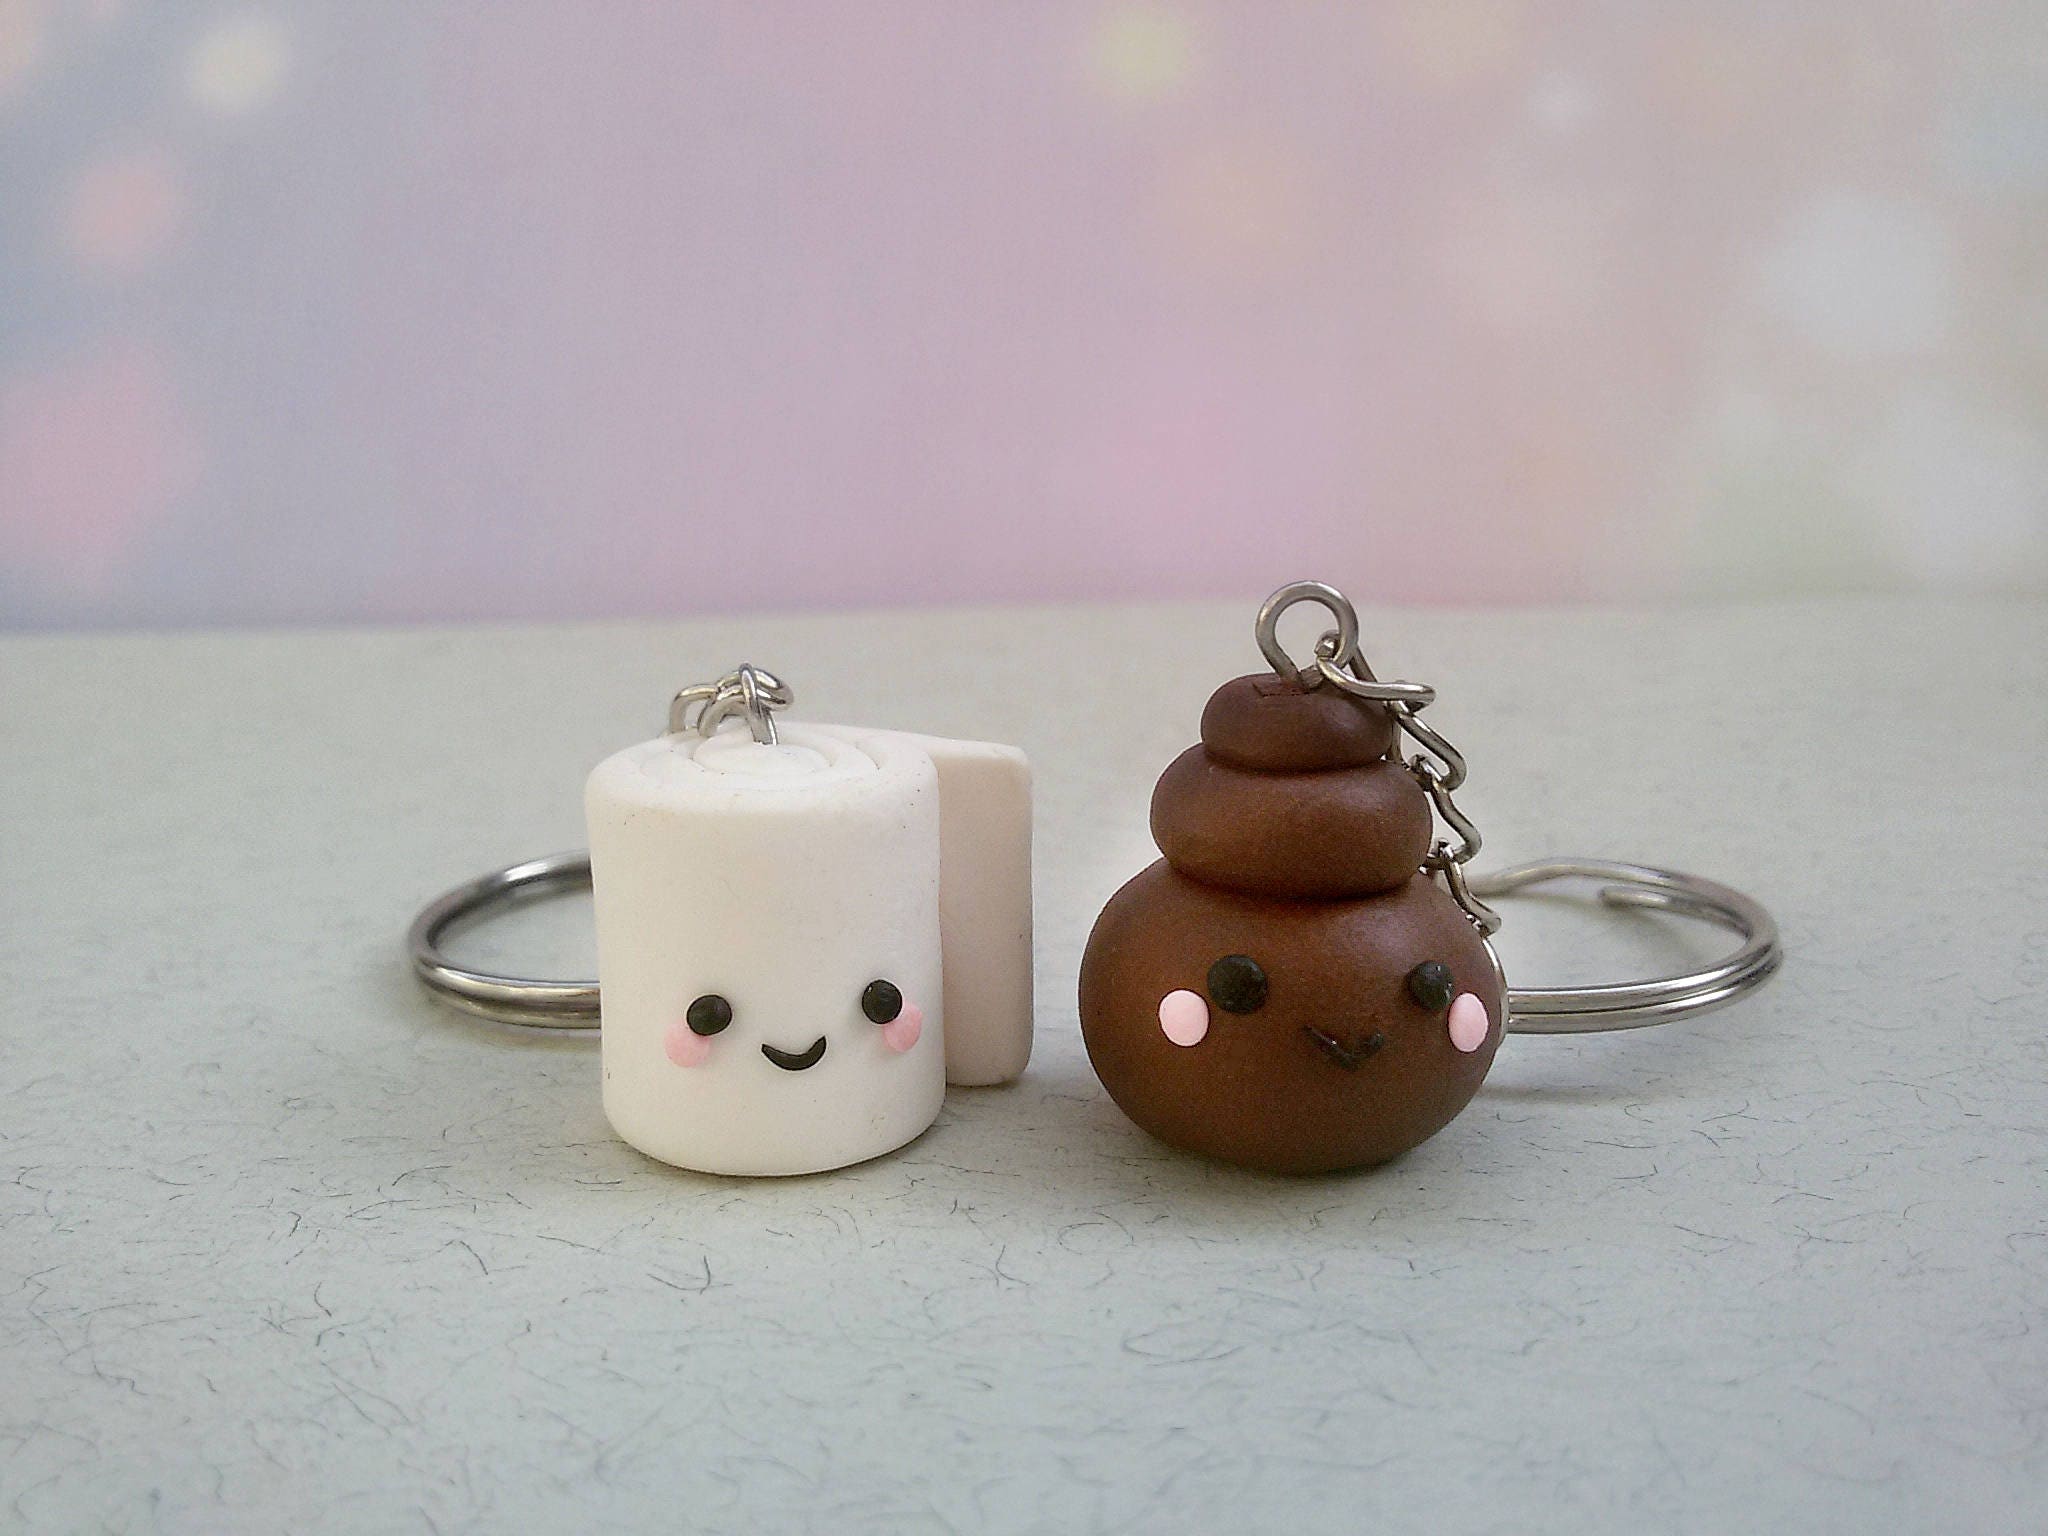 Toilet paper and poop keychain best friend keychain BFF gift best friend  charms kawaii charms poop and toilet paper best friend necklaces